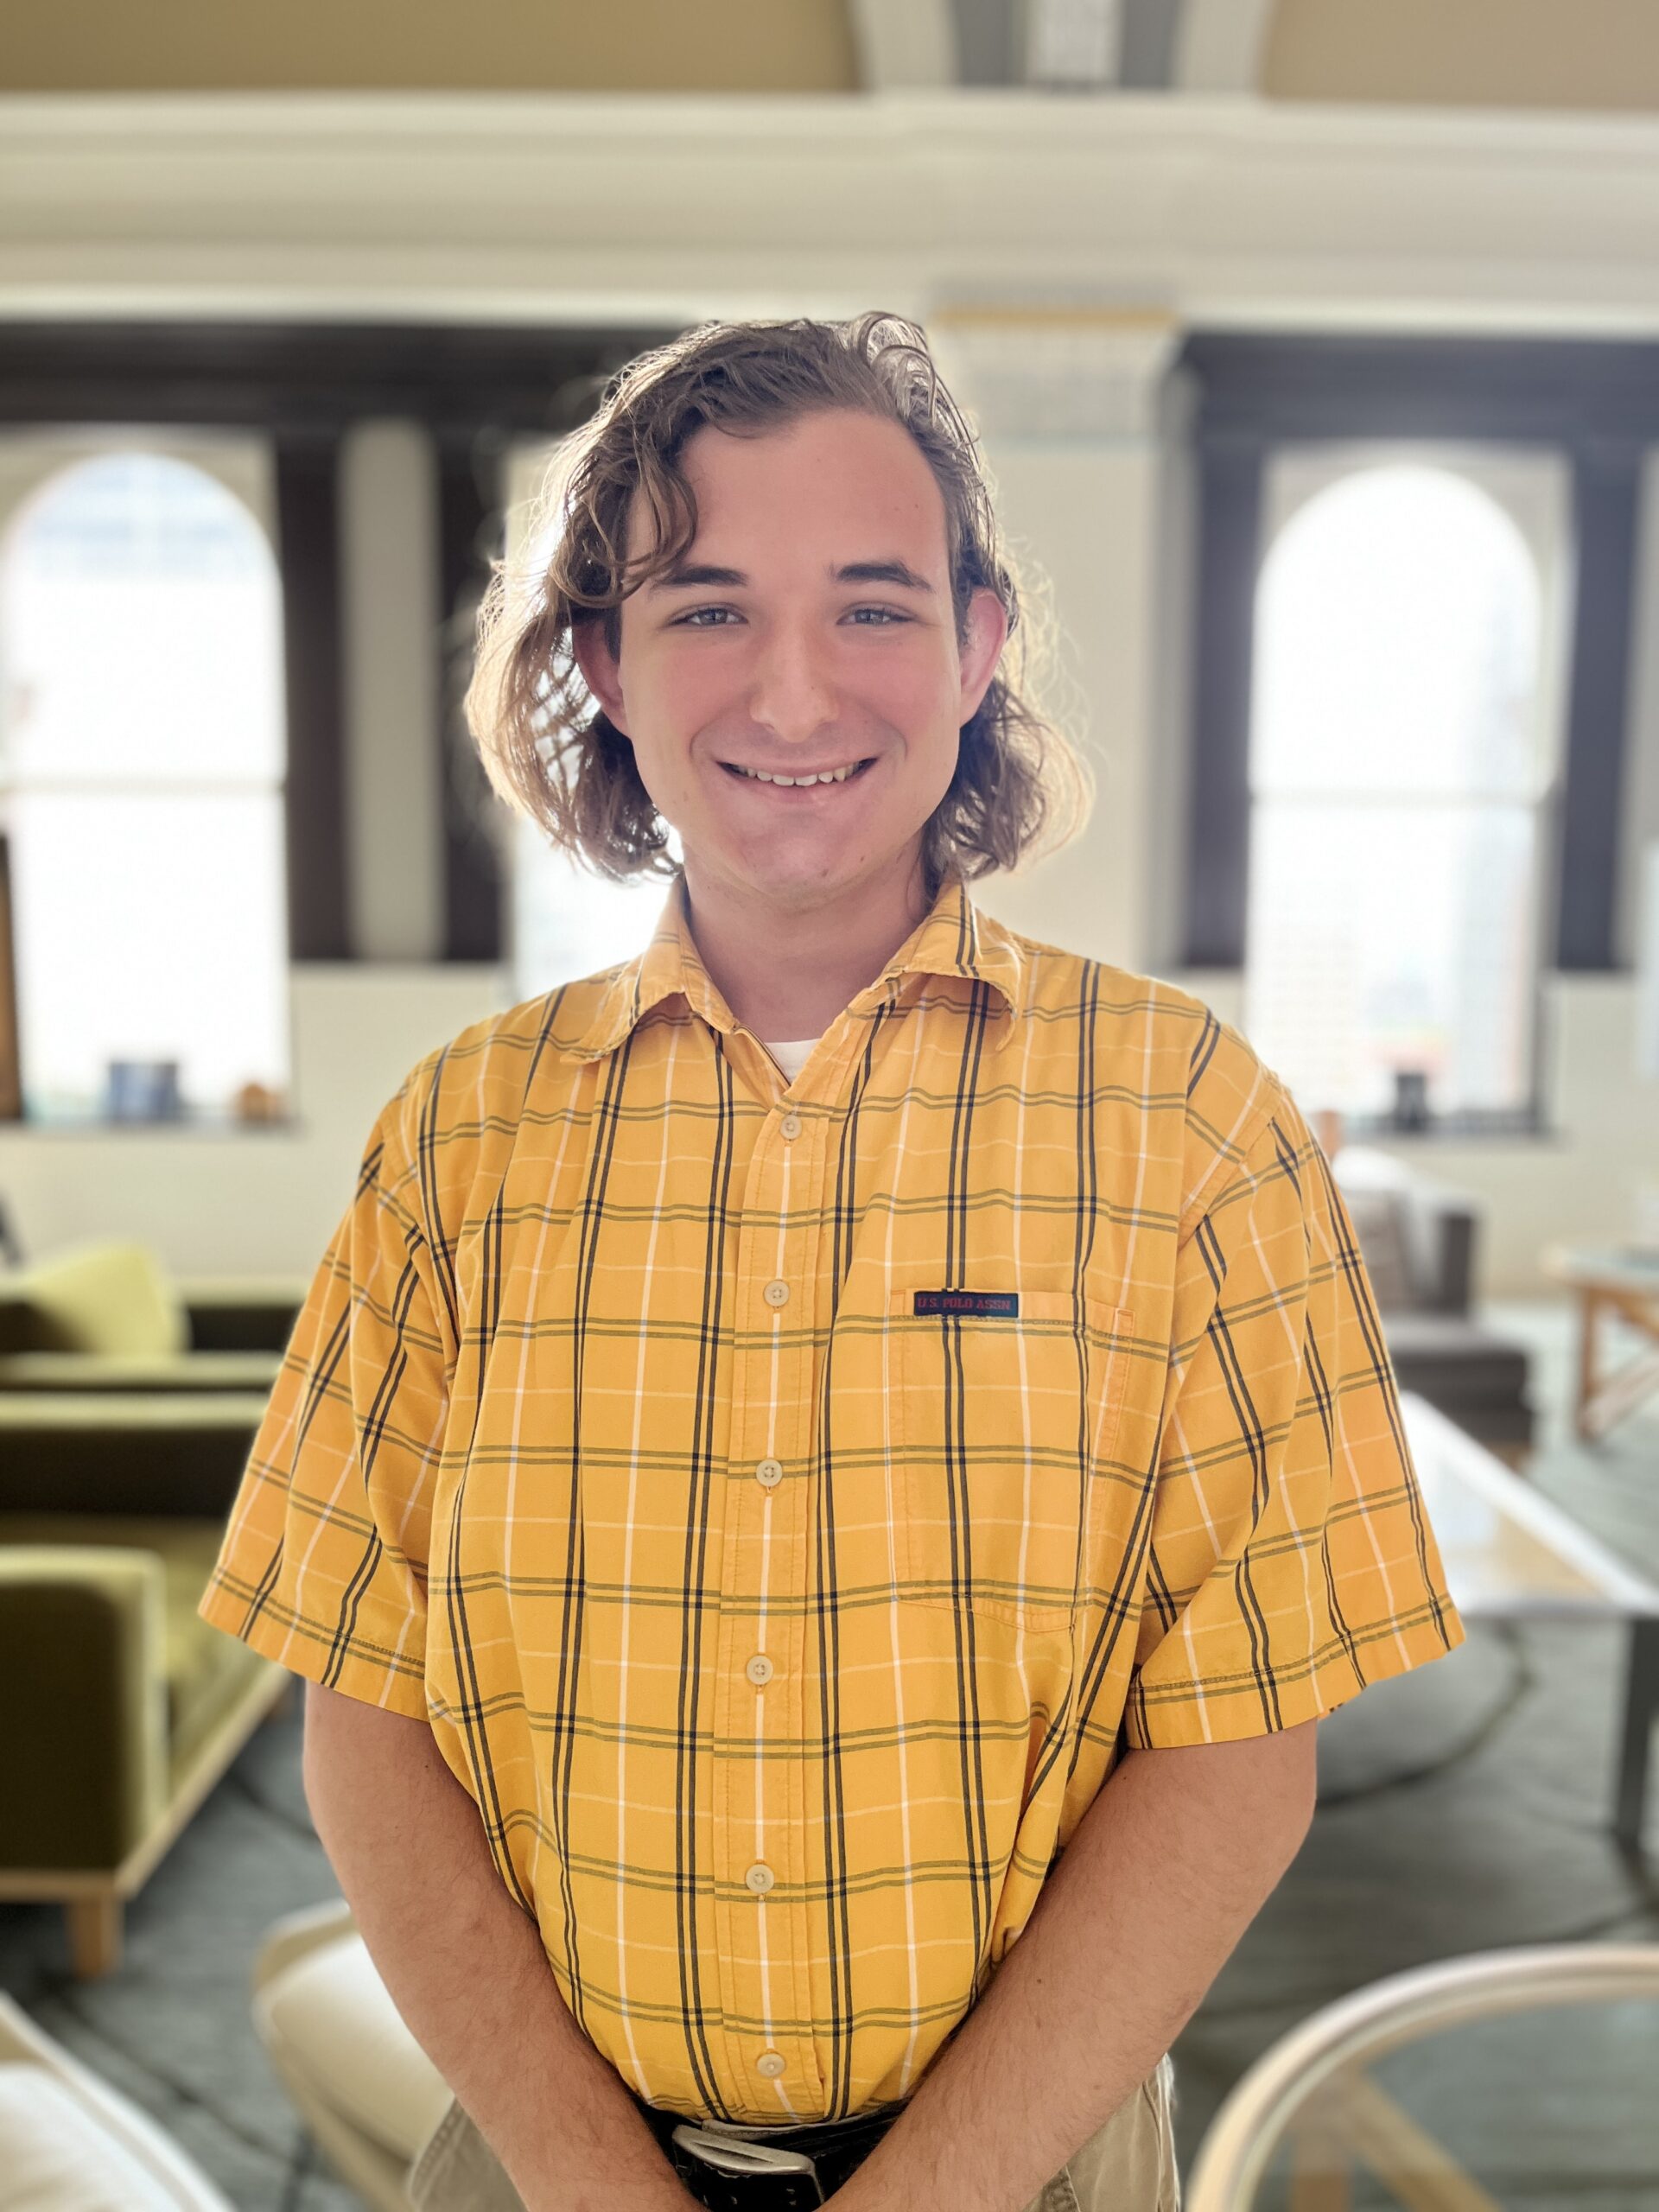 A young man wearing a yellow shirt smiles in a spacious, bright room